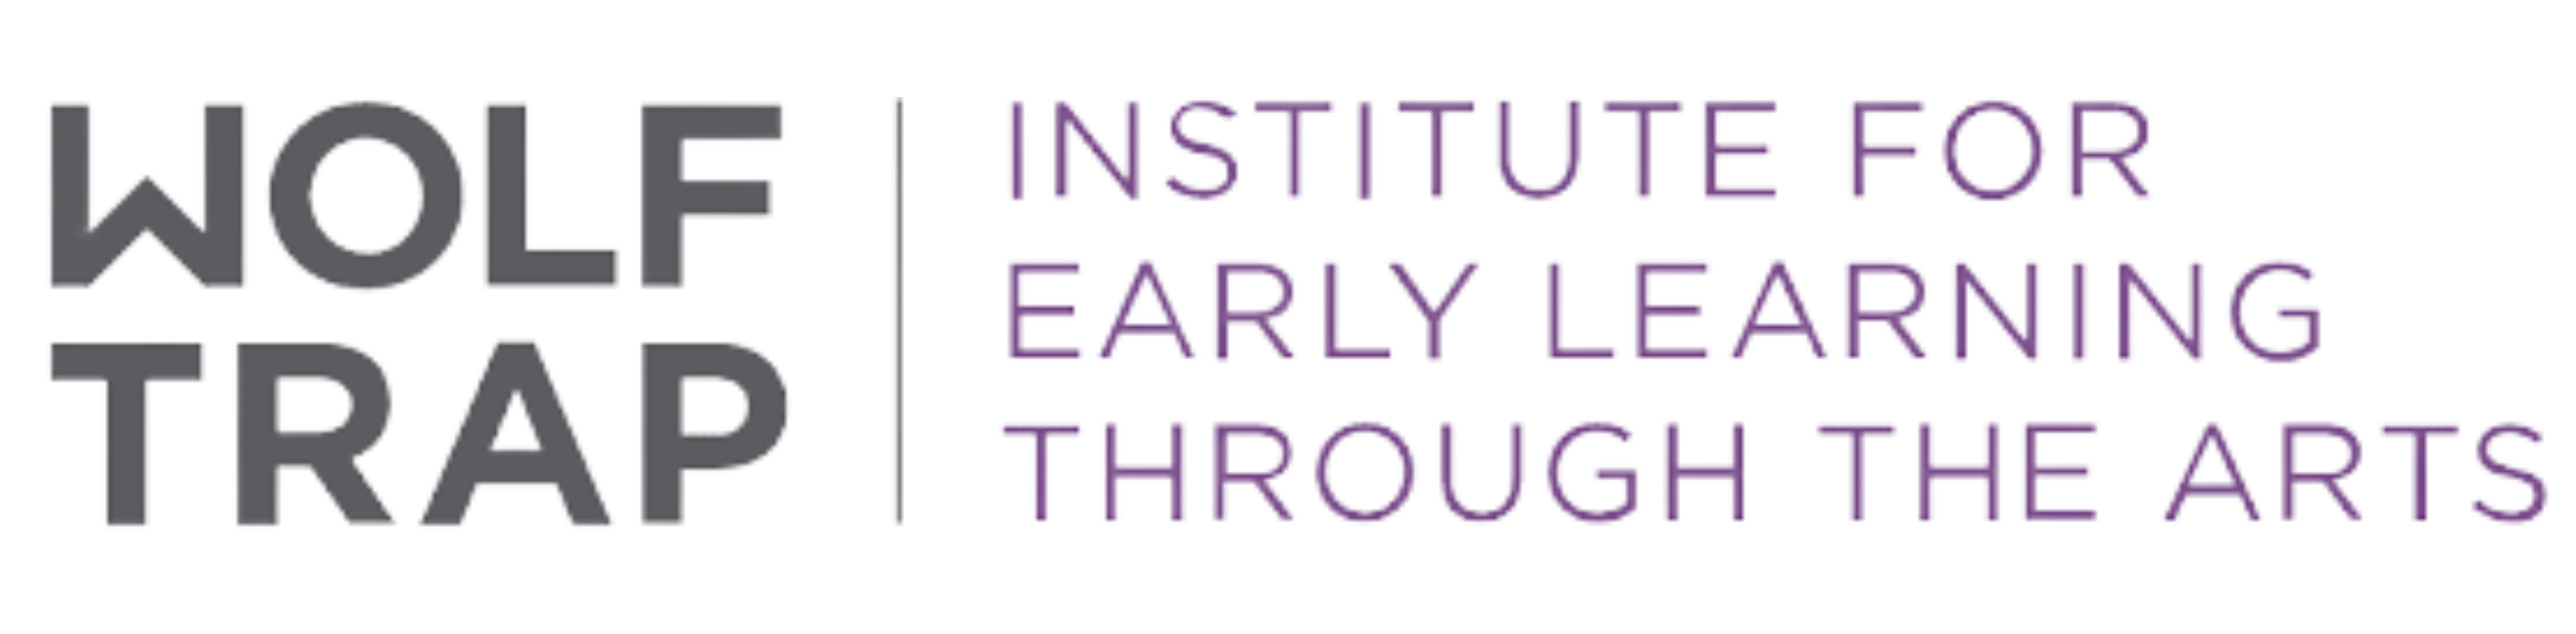 Wolf Trap Institute for Early Learning Through the Arts logo